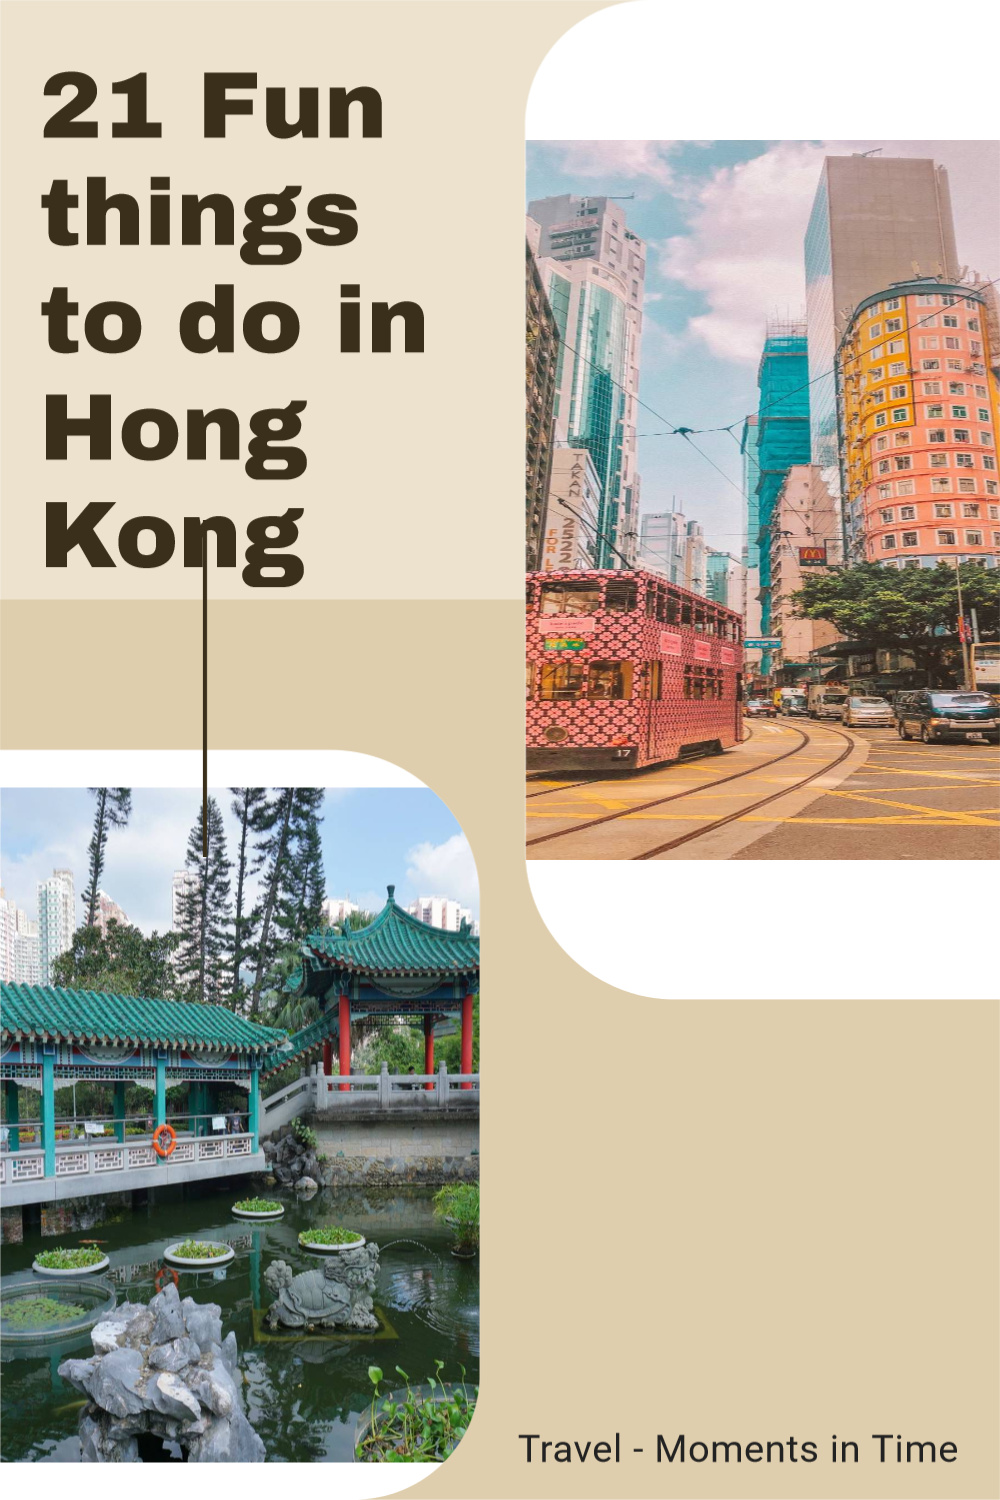 21 Fun things to do in Hong Kong. Discover the best fun acitivities in Hong Kong from this article! You'll find many ideas of places to visit in Hong Kong to include on your Hong Kong itinerary! #hongkong #hongkongthingstodo #asiatravel #travelmomentsintime #traveldestinations #explore #travelblogger #traveling